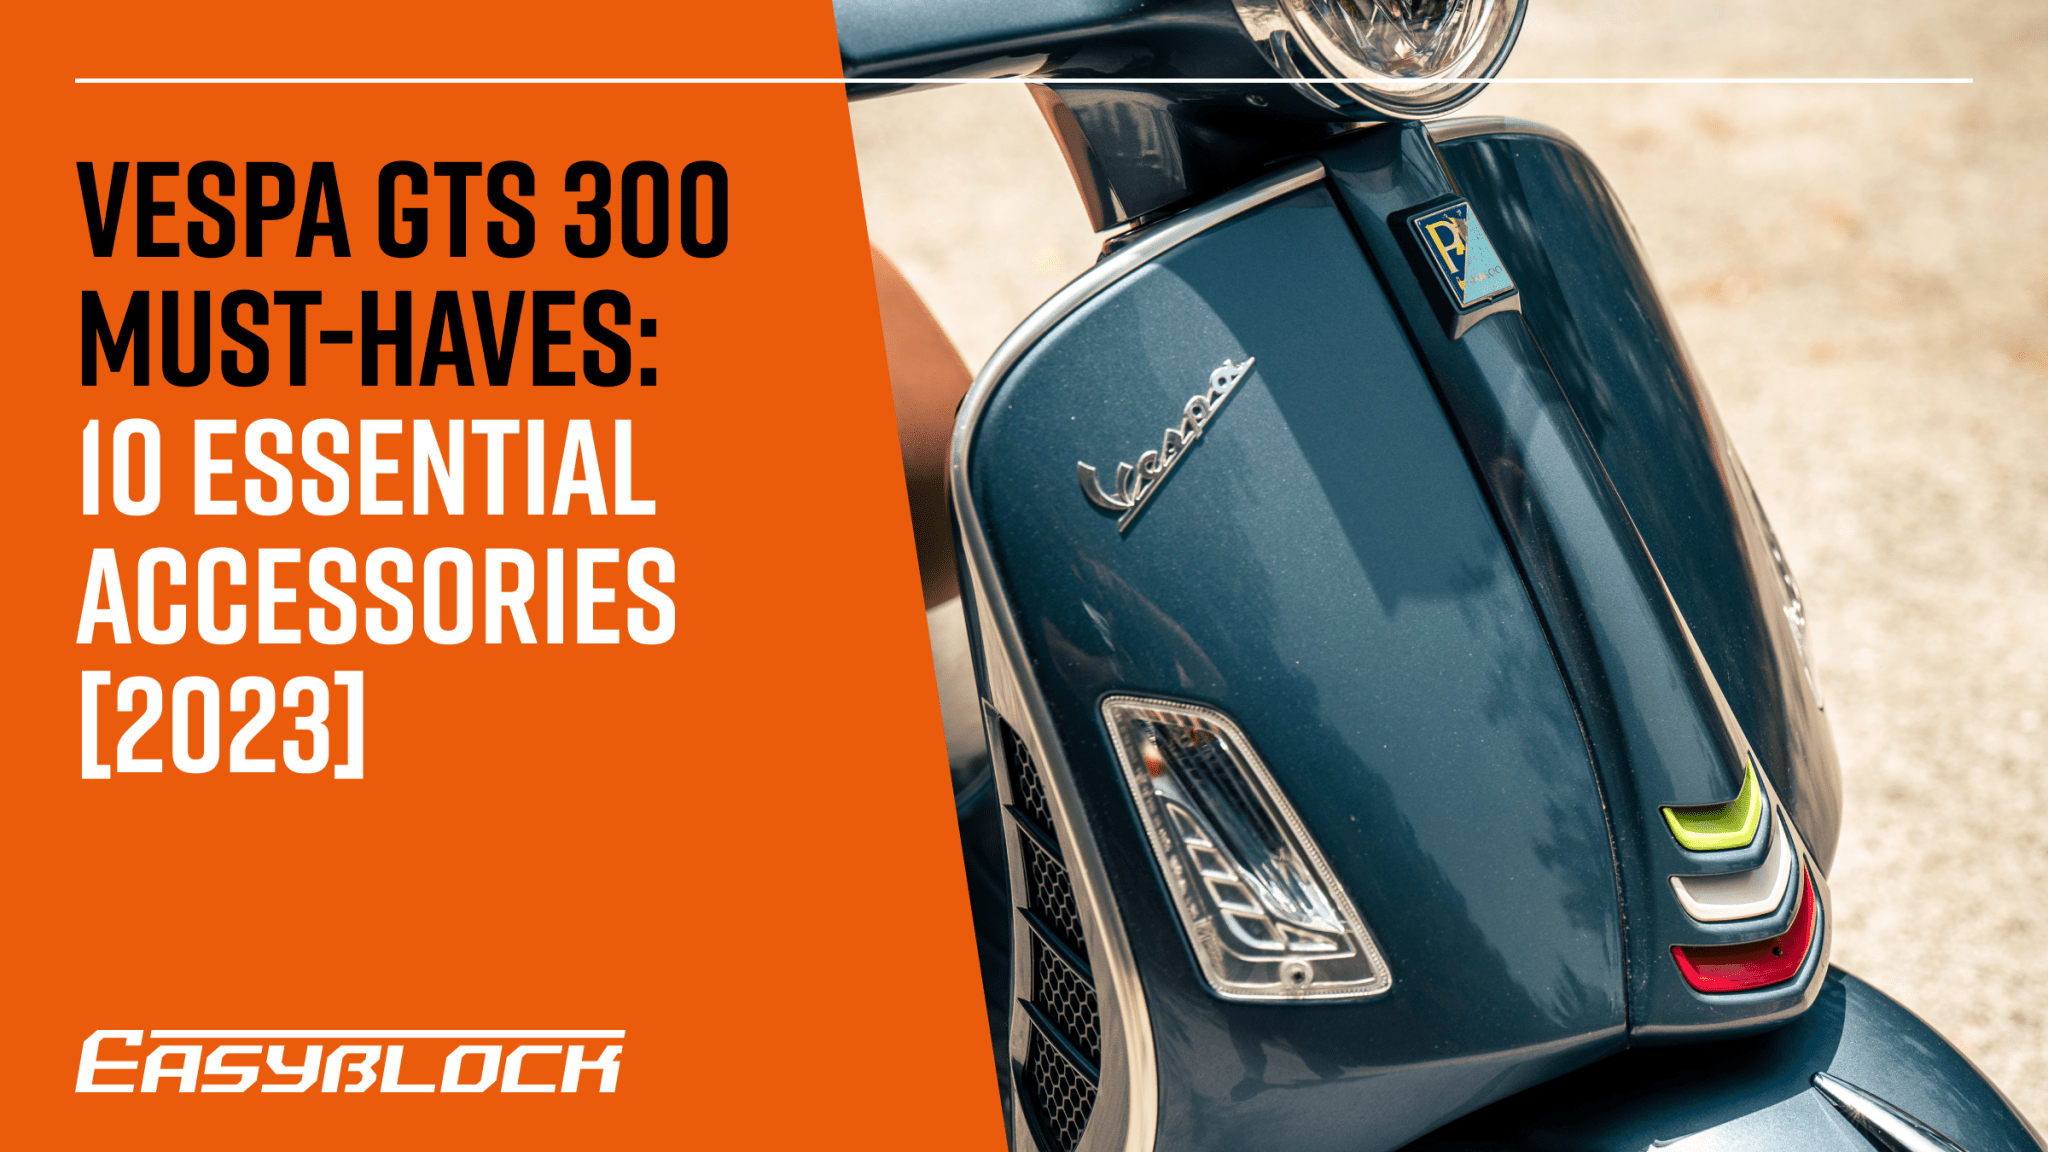 Vespa GTS 300 Must-Haves: 10 Essential Accessories [2023]